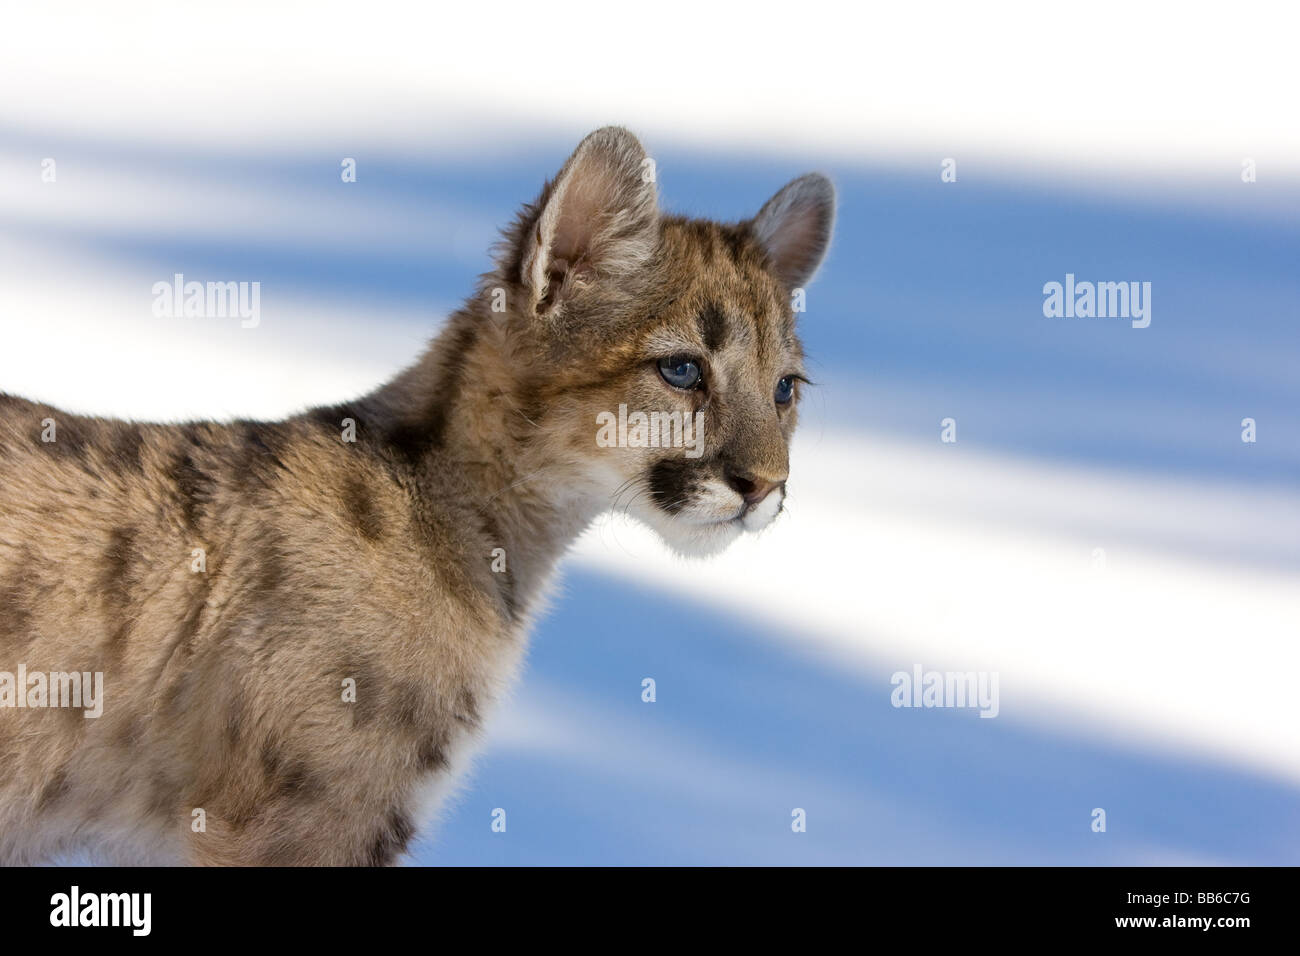 Young mountain lion, cougar, in snow Stock Photo